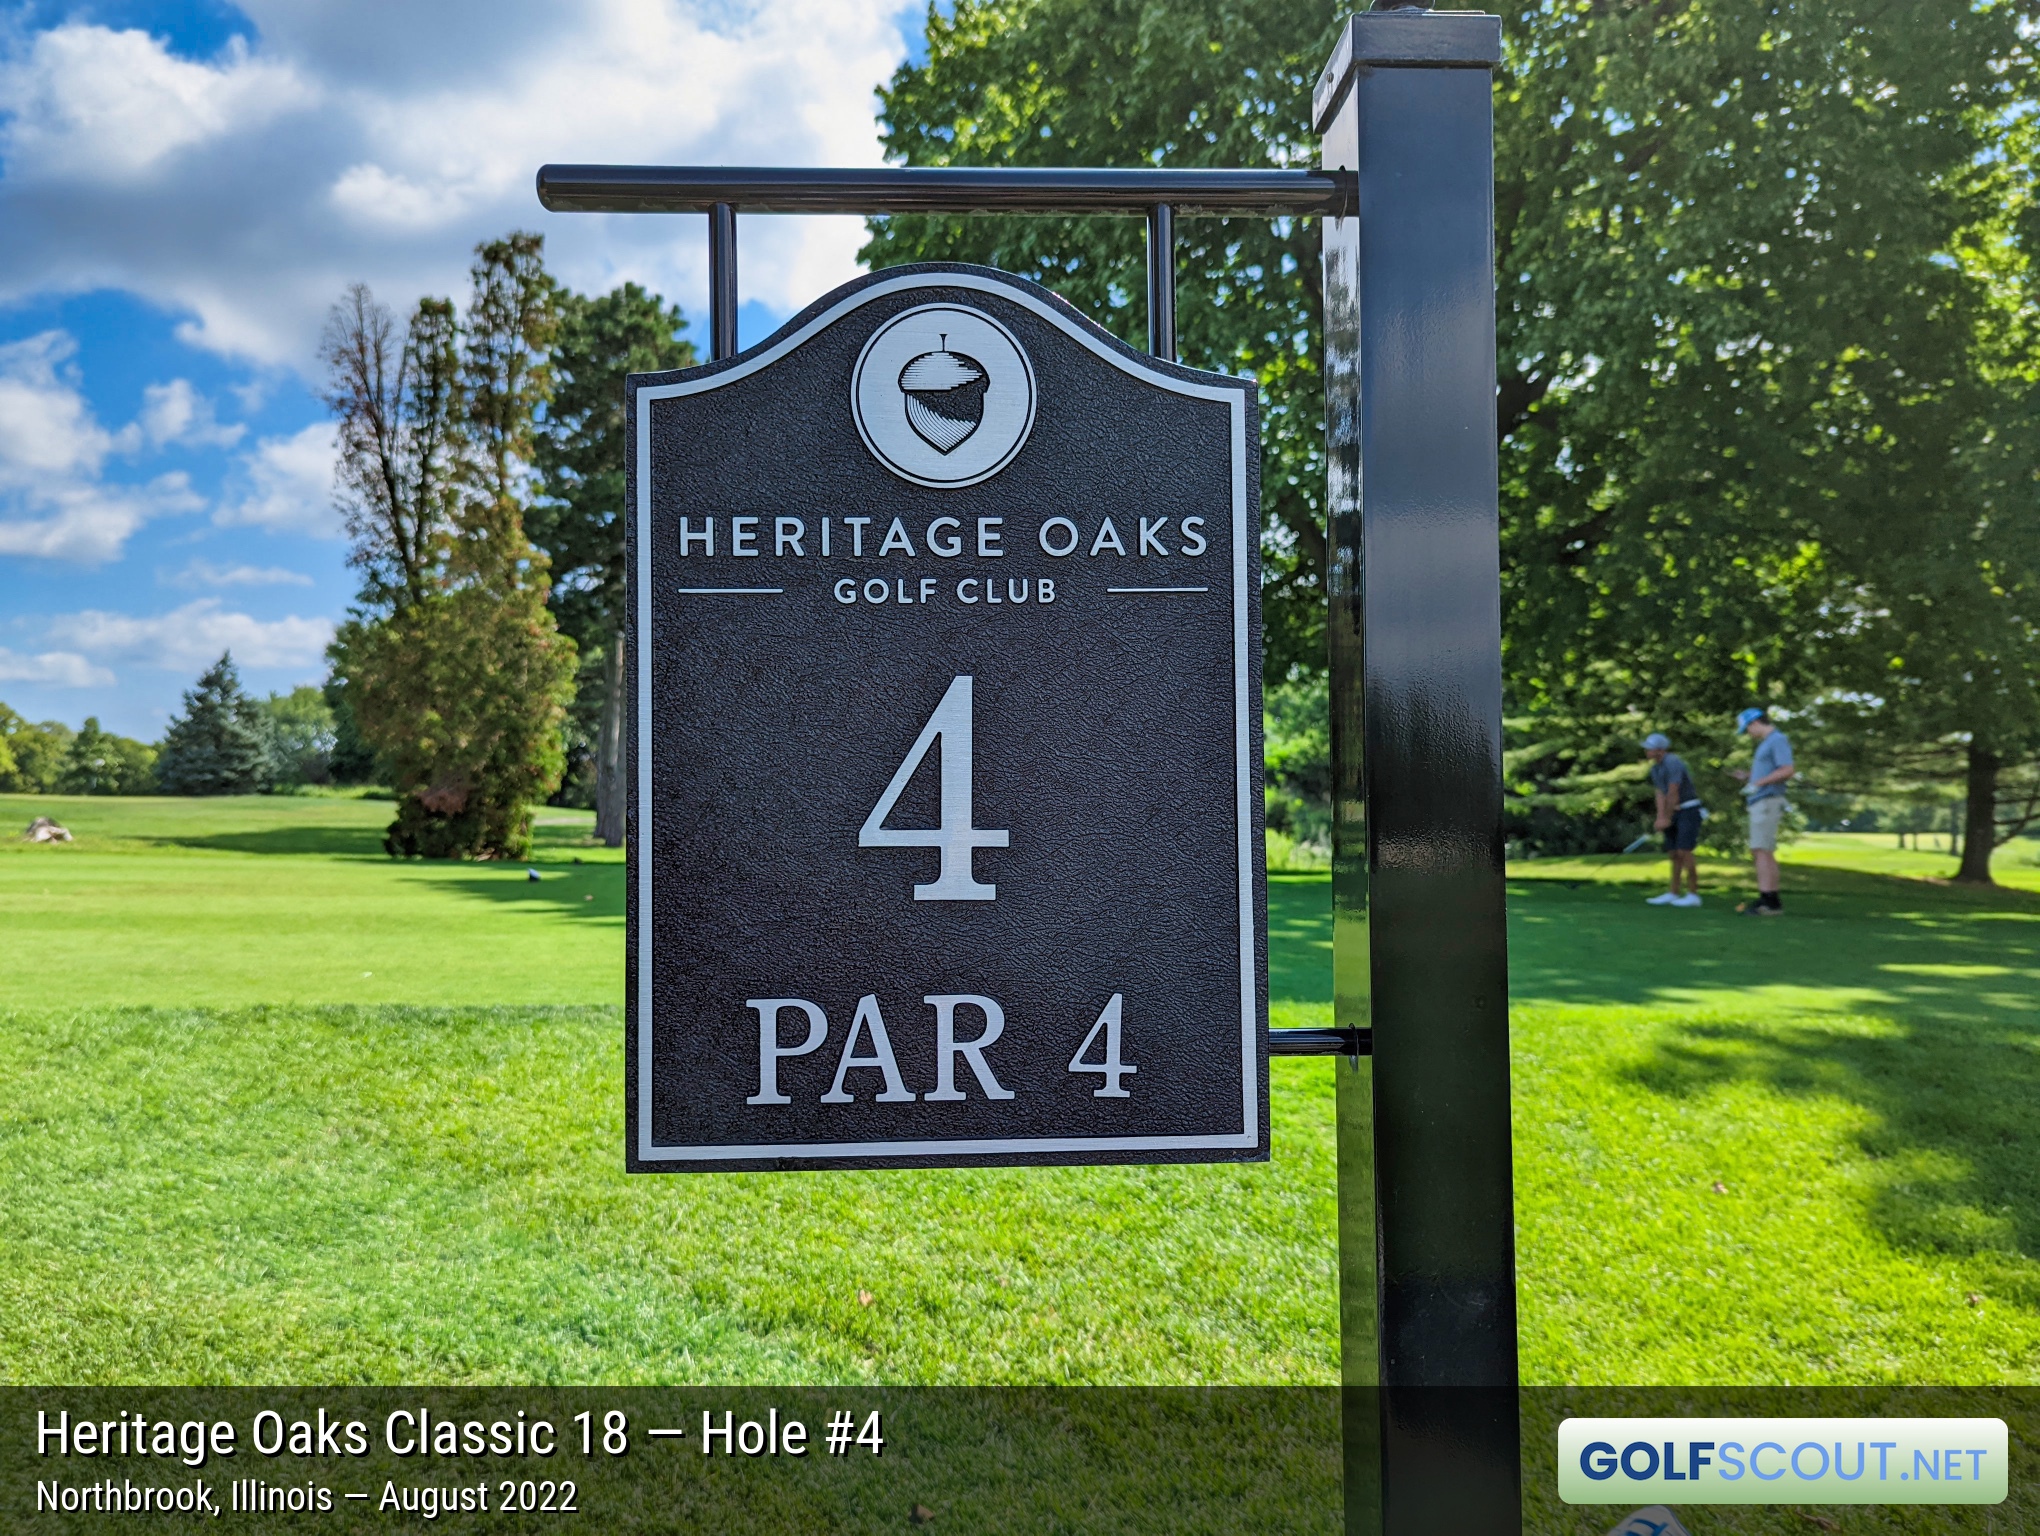 Photo of hole #4 at Heritage Oaks Golf Club - Classic 18 in Northbrook, Illinois. 